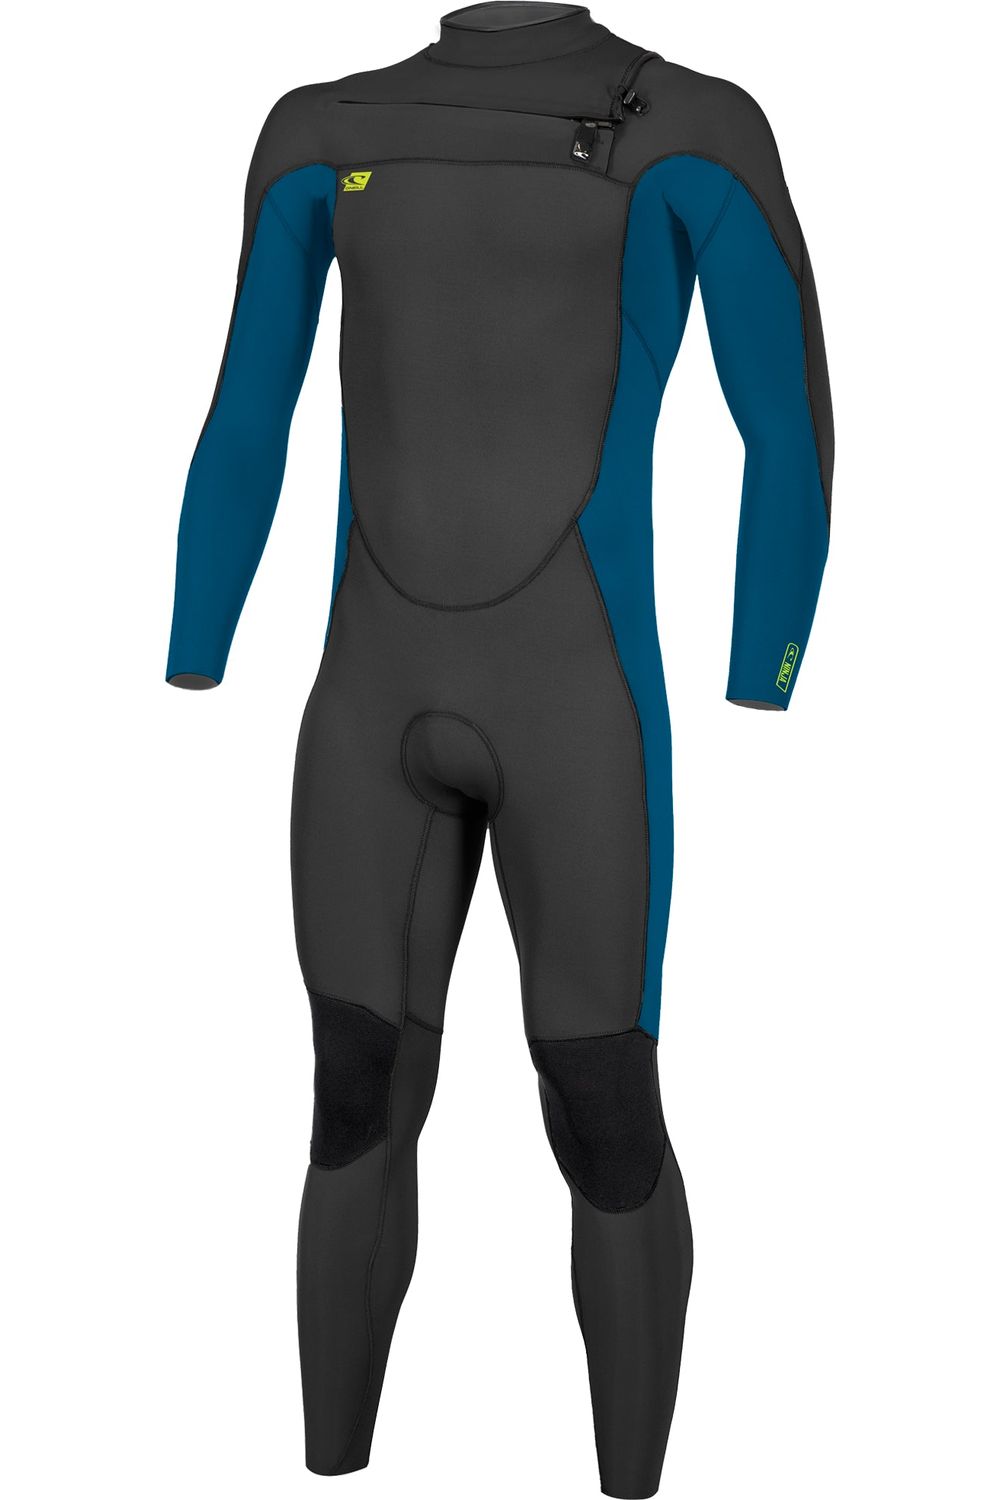 O'Neill Ninja Youth Wetsuit 4/3 Chest Zip Black Blue Dayglo